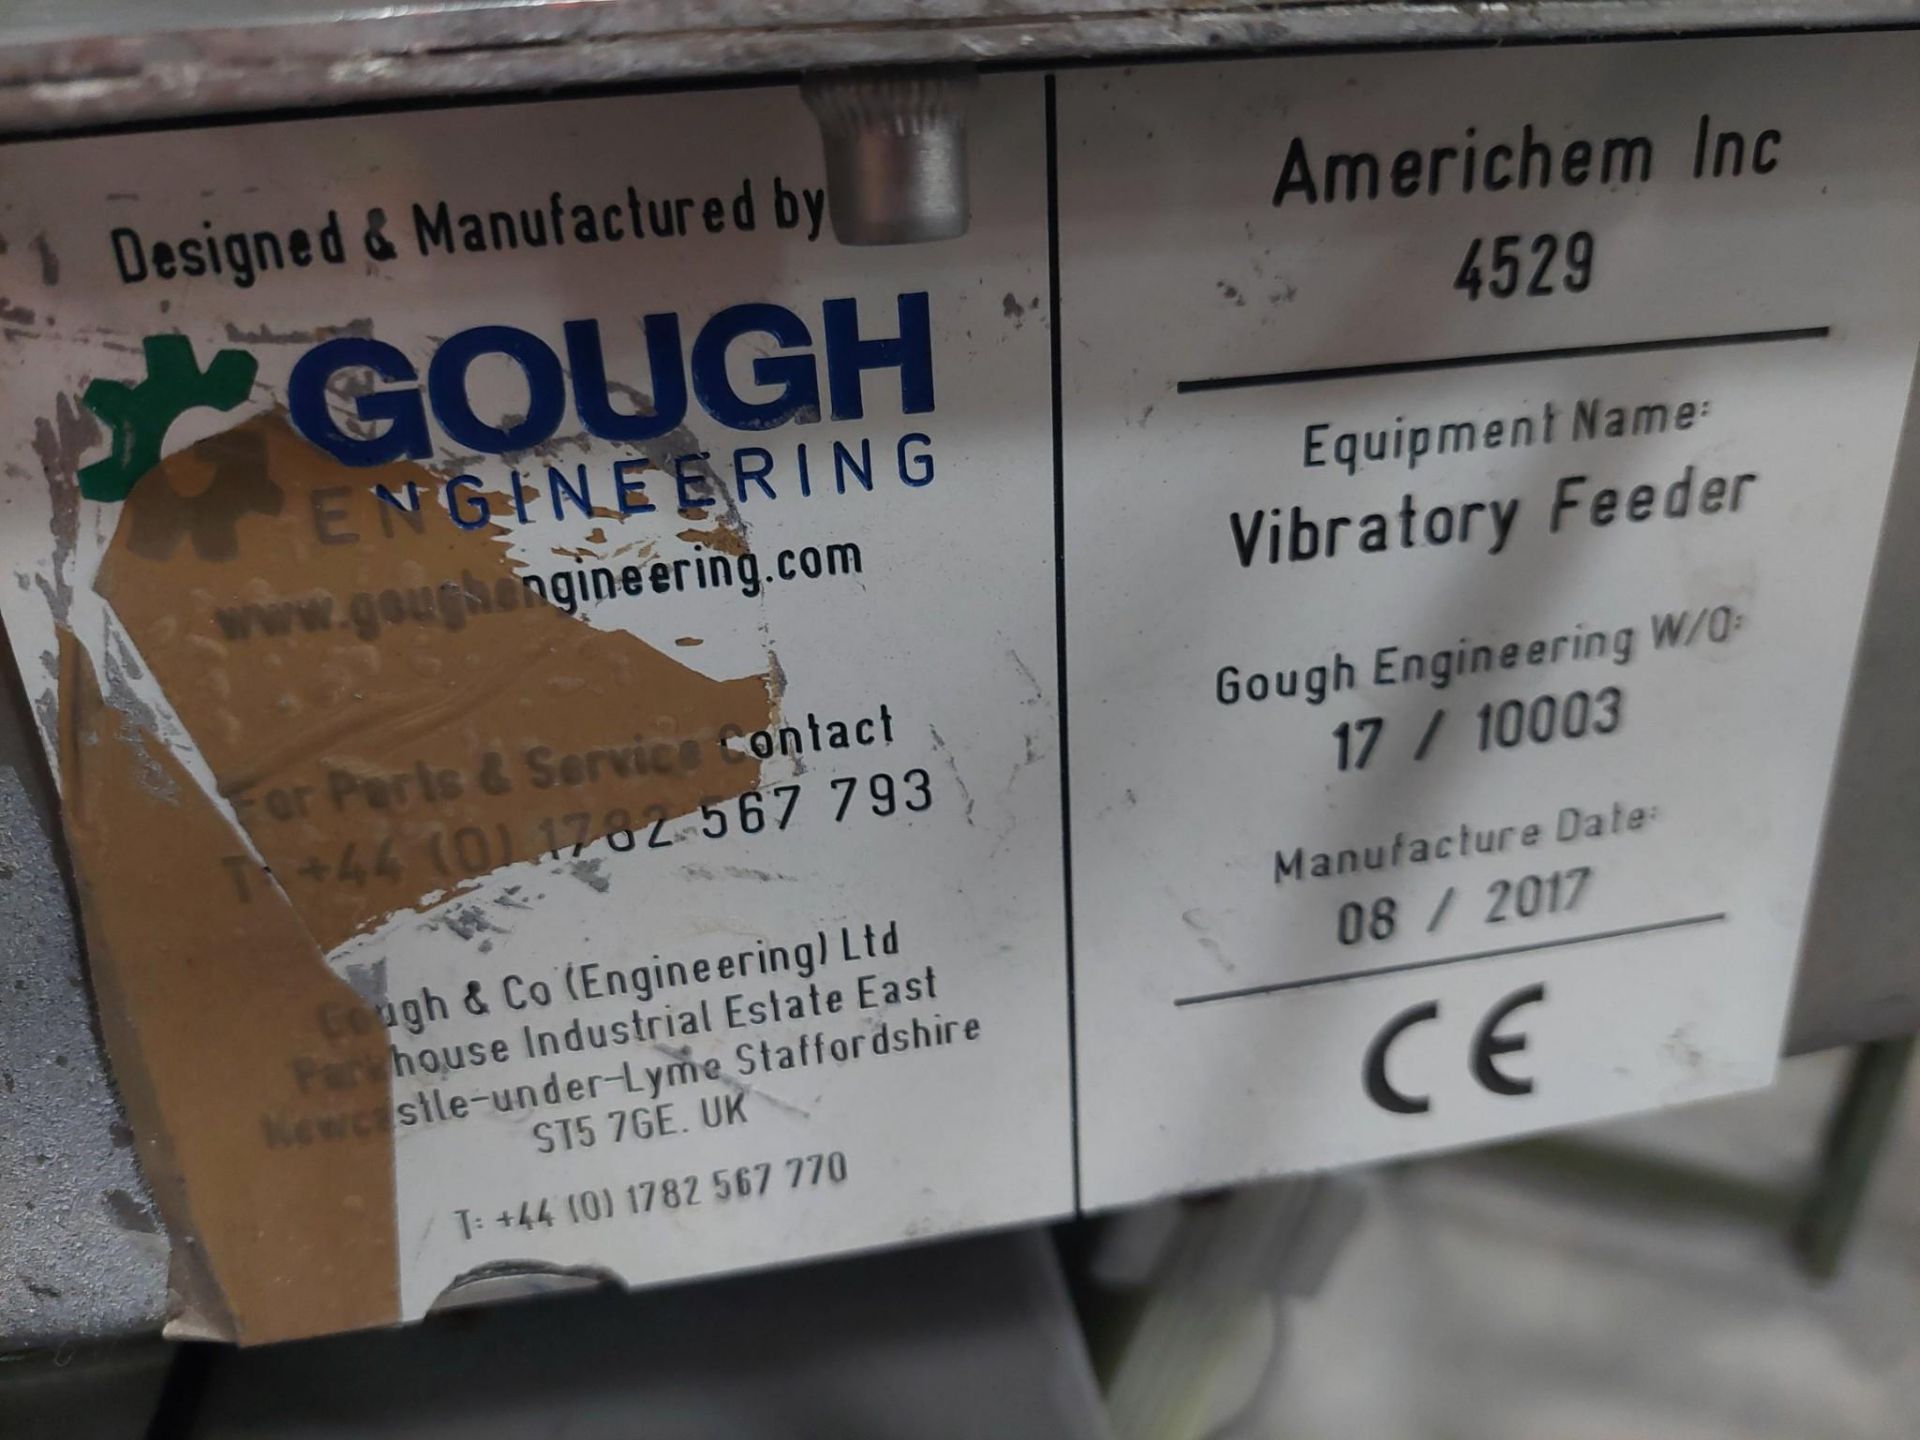 GOUGH ENGINEERING 8" X 48" VIBRATORY FEEDER STAINLESS STEEL ON STAND 8" FEED OPENING. - Image 7 of 7